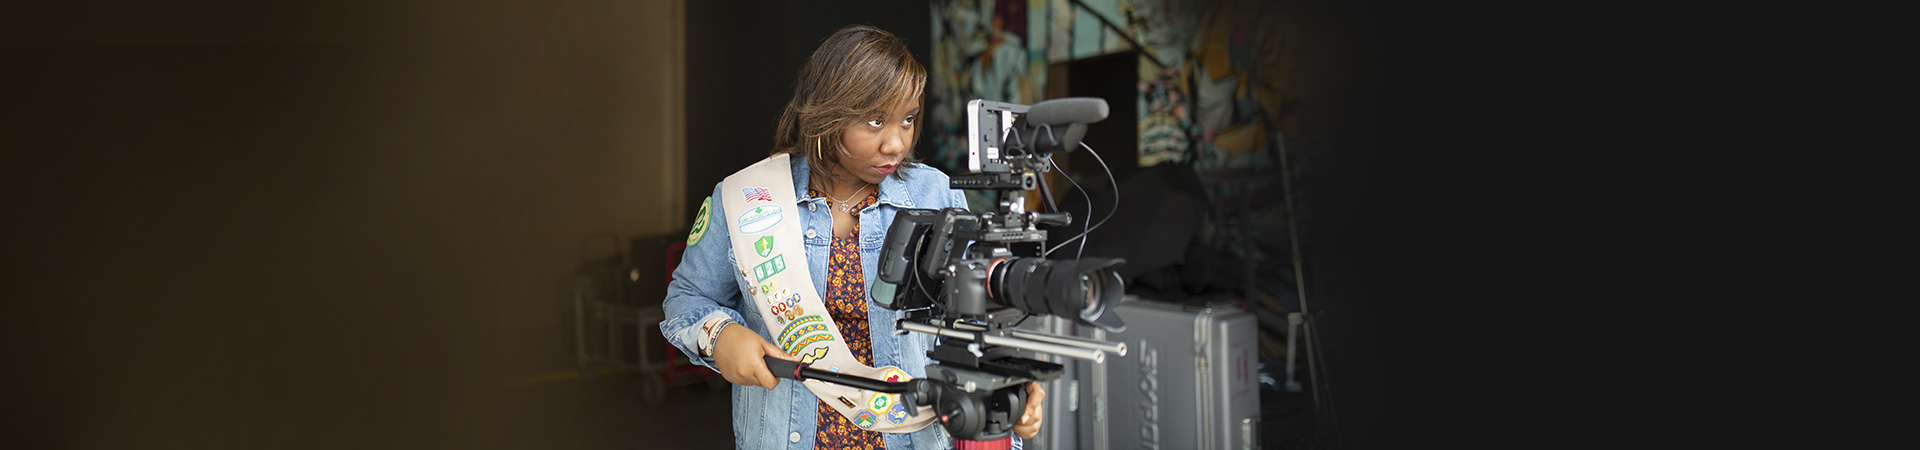  teenage girl scout focused on using a video camera 